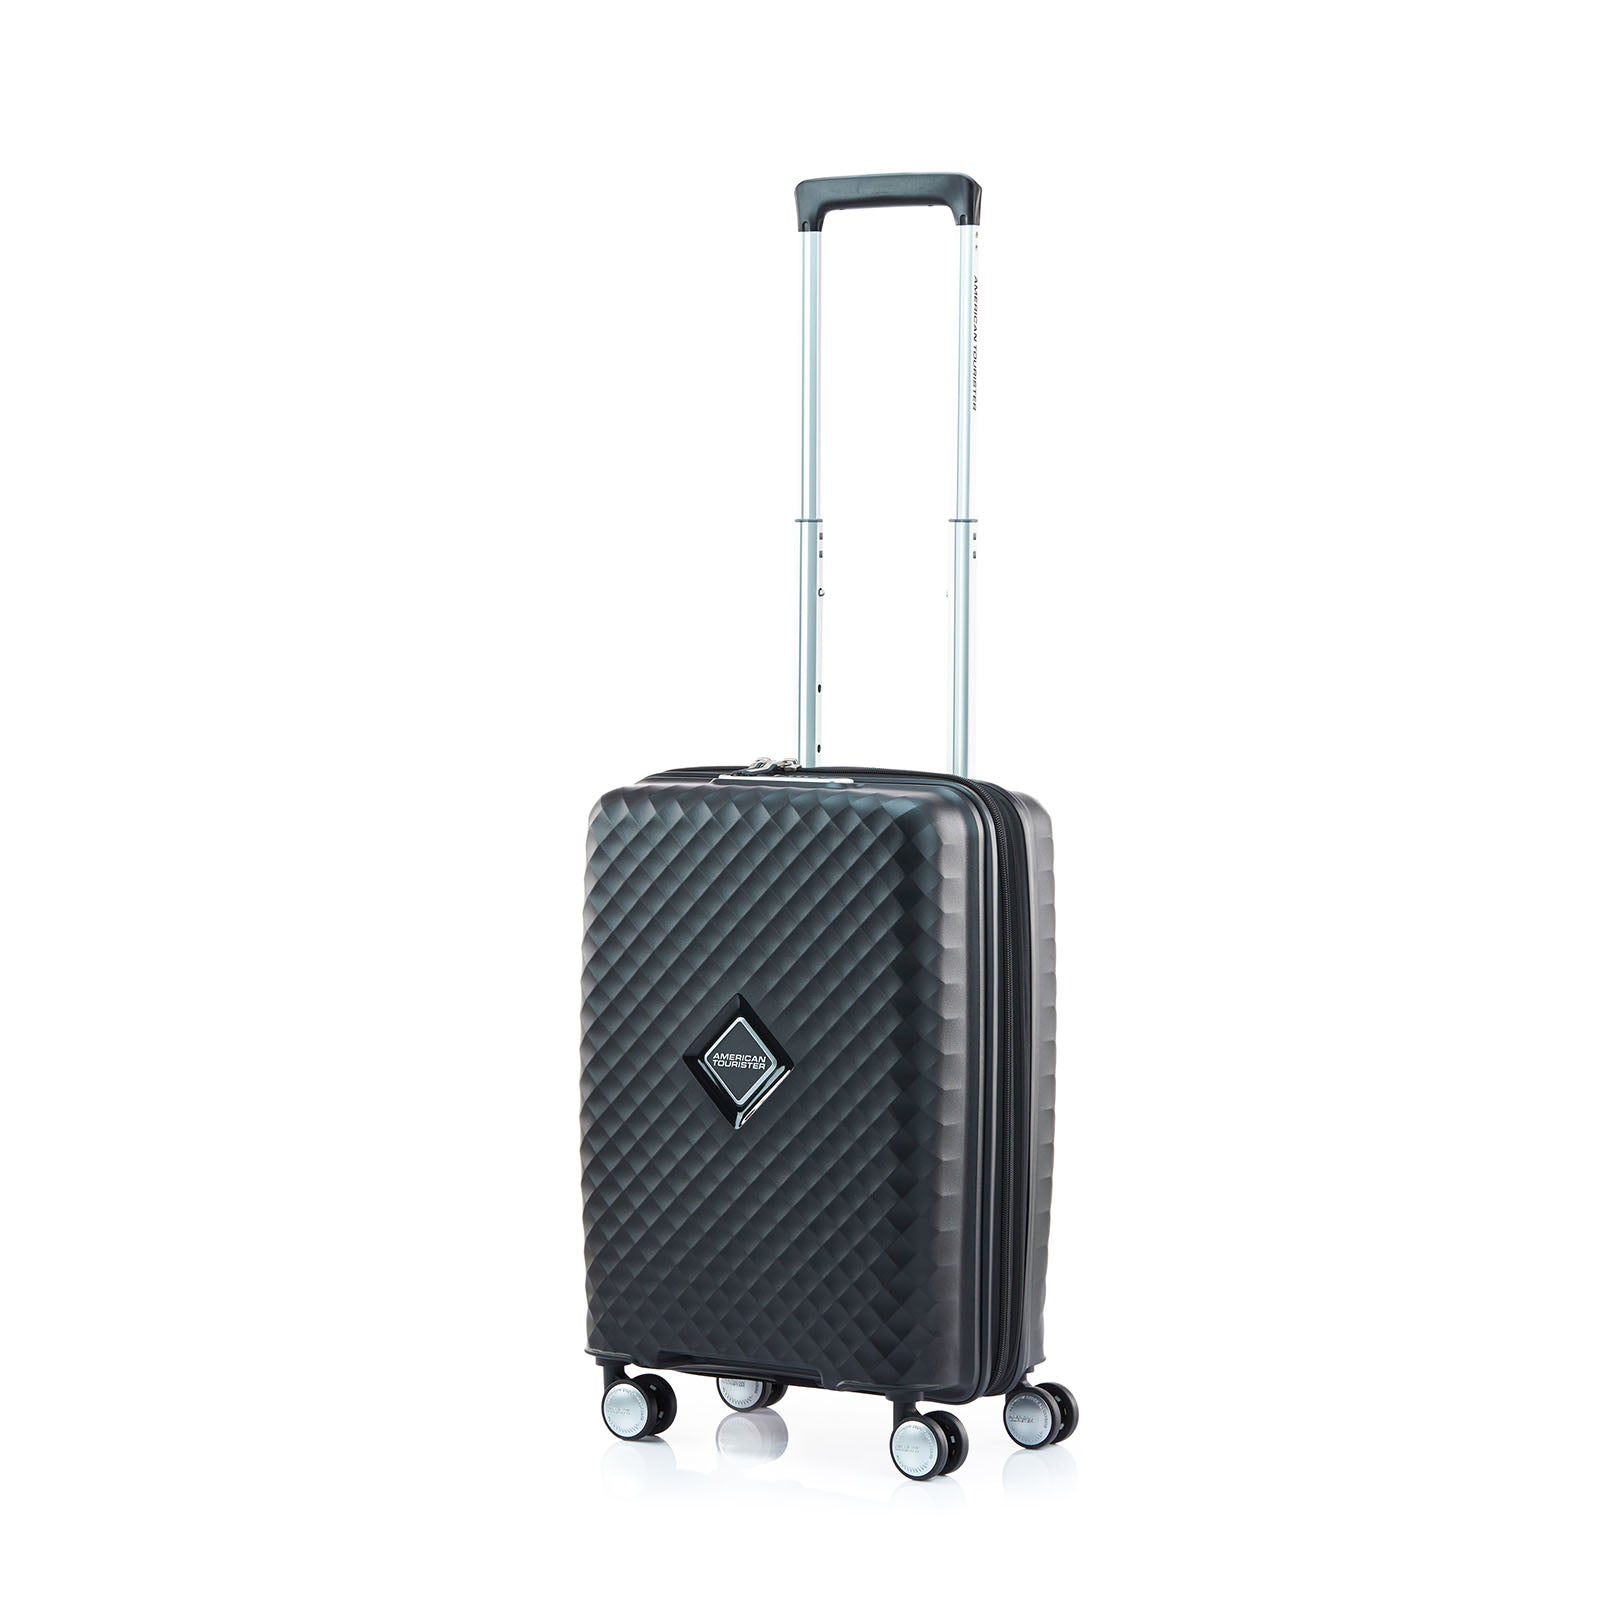 American-Tourister-Squasem-55cm-Carry-On-Suitcase-Black-Front-Angle